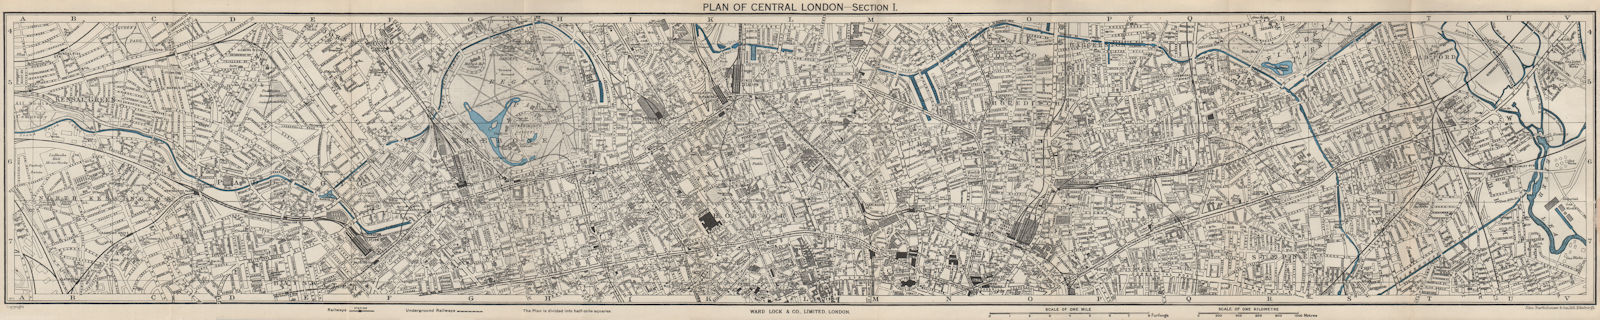 Associate Product CENTRAL LONDON-SECTION I vintage city/town plan. London. WARD LOCK 1951 map